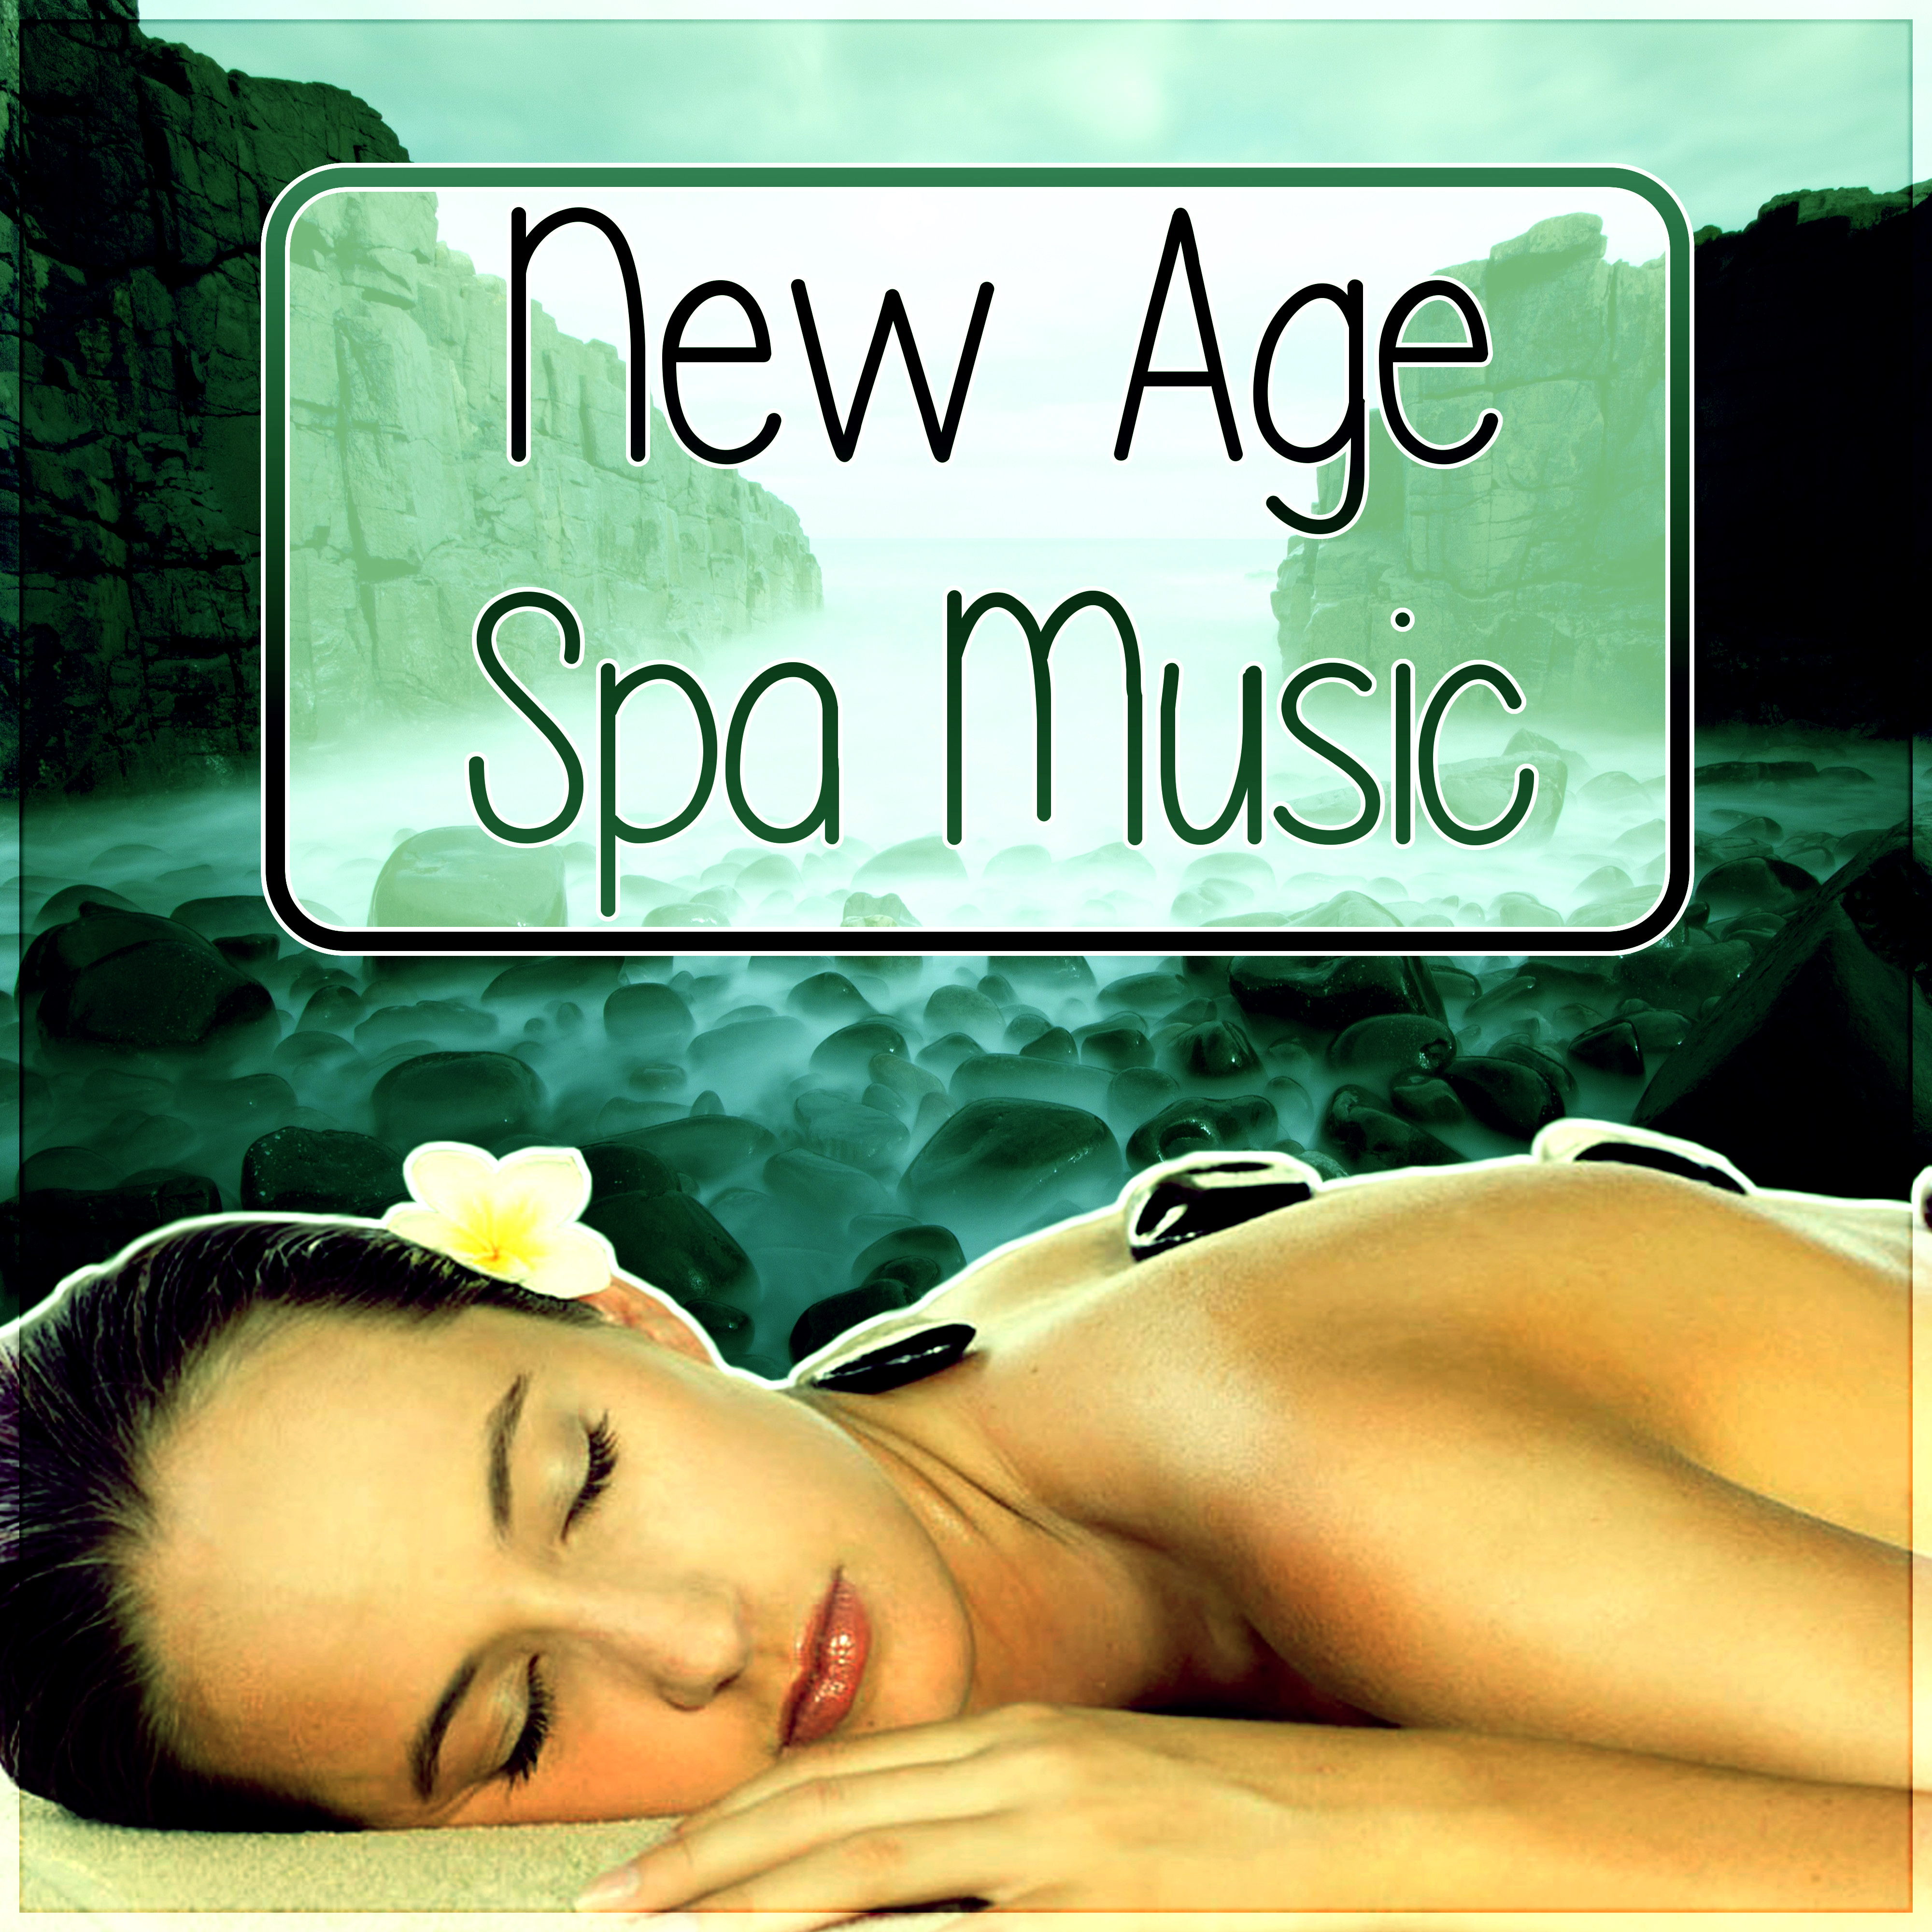 New Age Spa Music - Wellness, Hydrotherapy, Massage Music, Nature Sounds, Easy Going, Total Relax, Lounge Music, Well Being